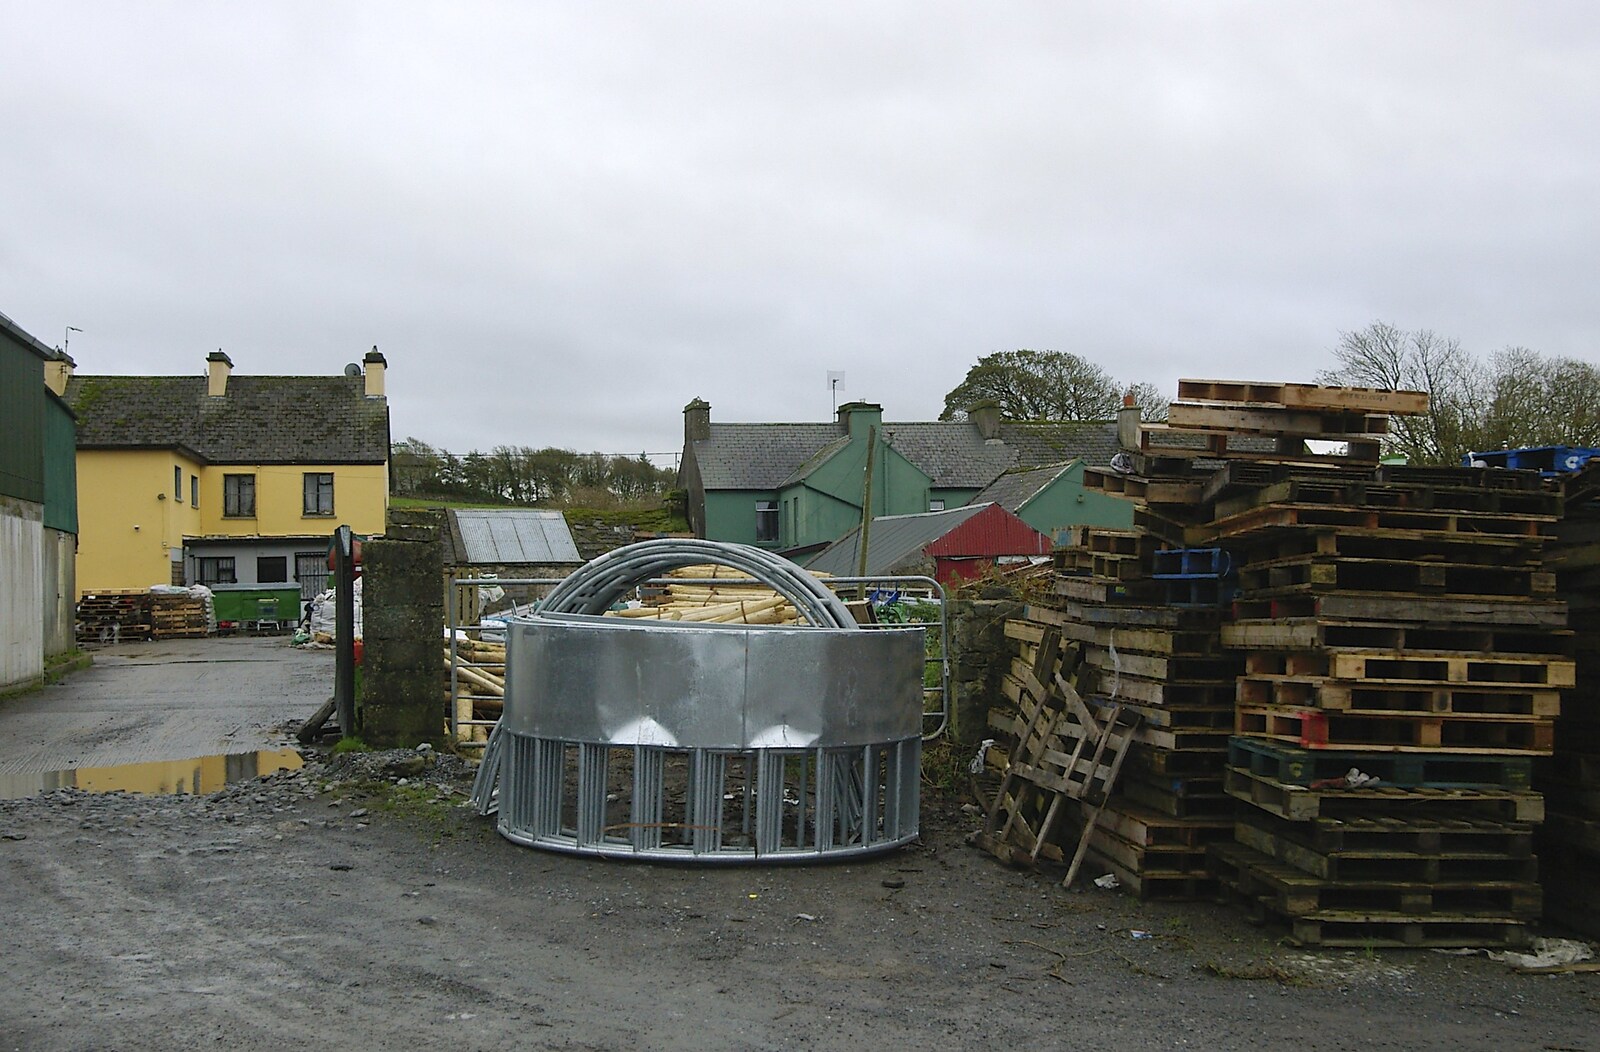 Animal feeders and a pile of pallets from Corofin, Ennistymon and The Burran, County Clare, Western Ireland - 27th October 2006